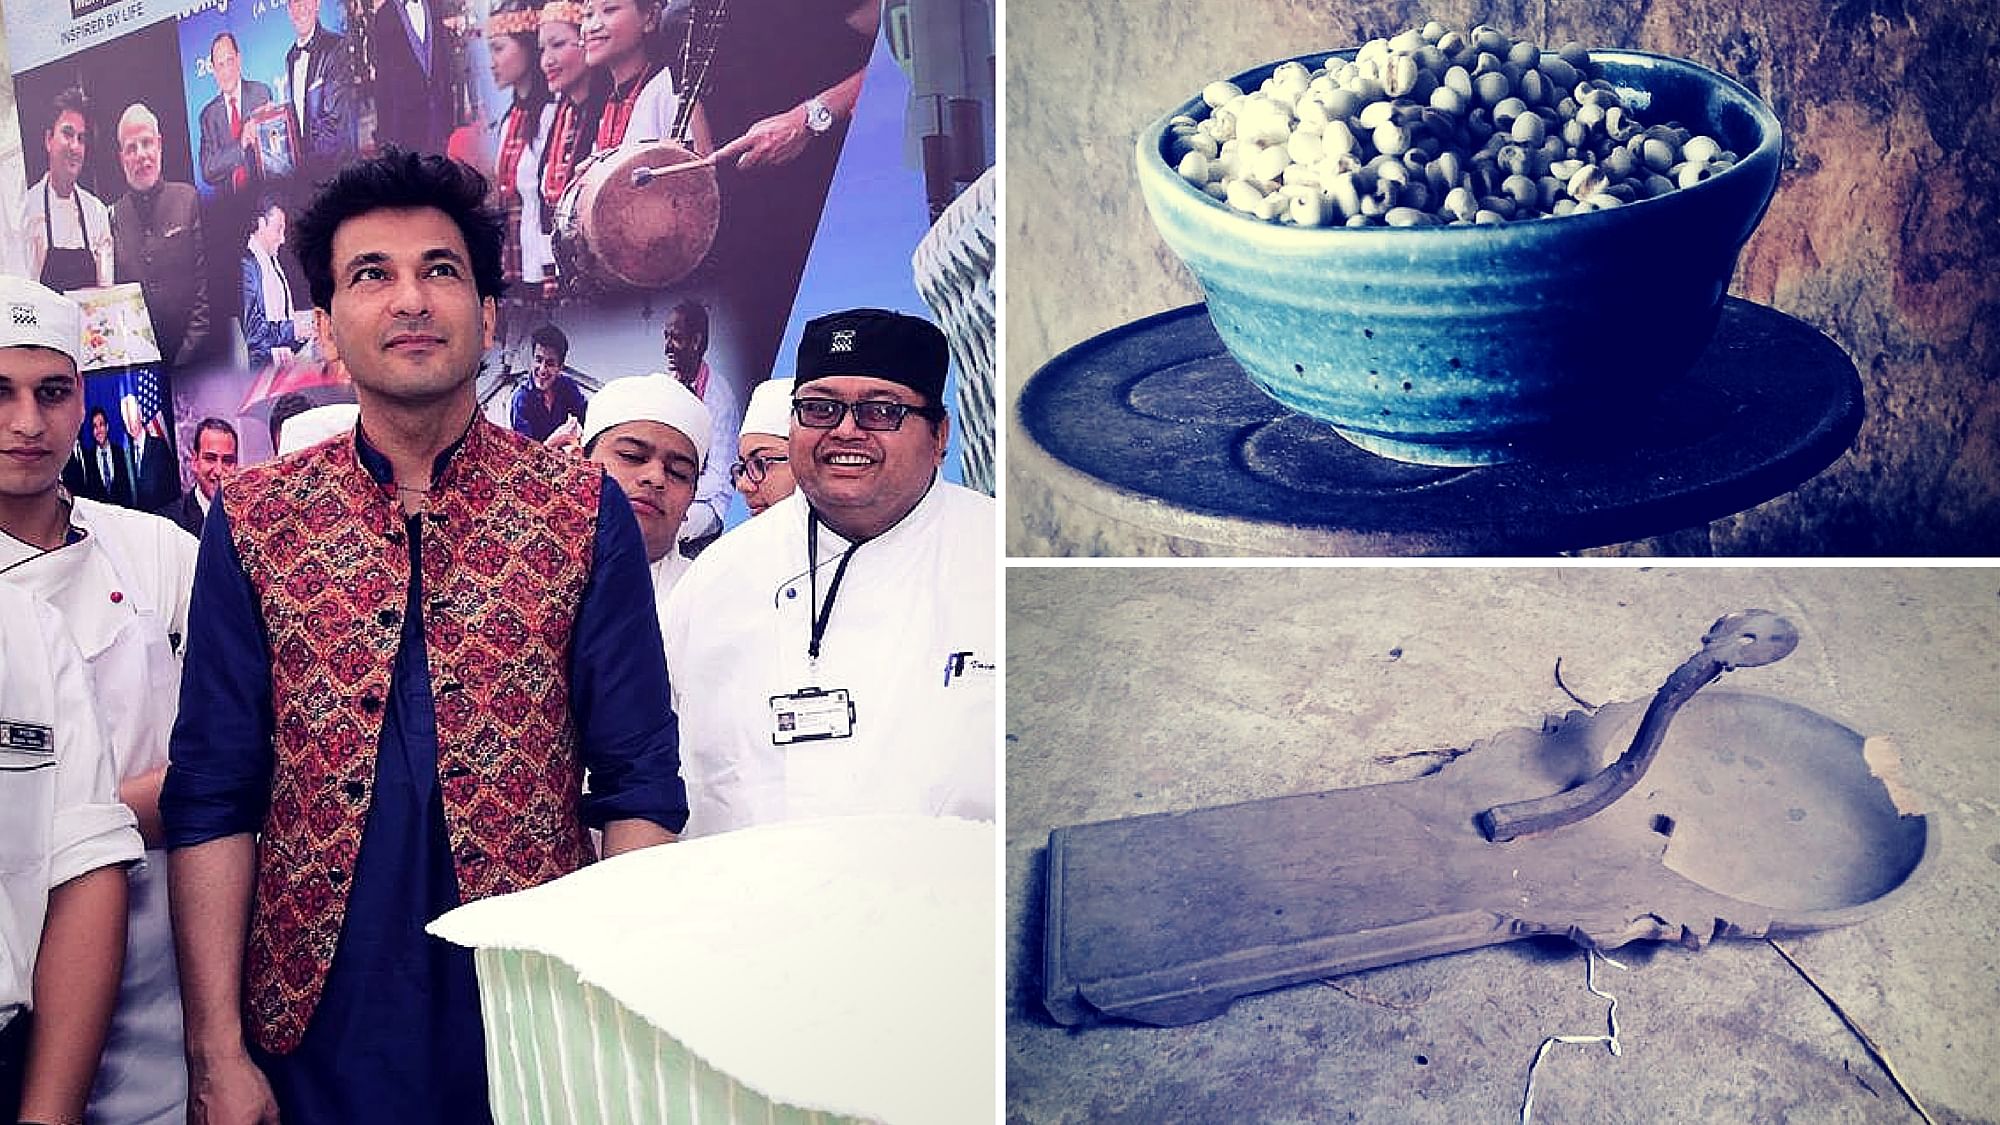 Popular chef Vikas Khanna has started the world’s first kitchen art museum. (Photo Courtesy: Welcomgroup Graduate School of Hotel Administration)